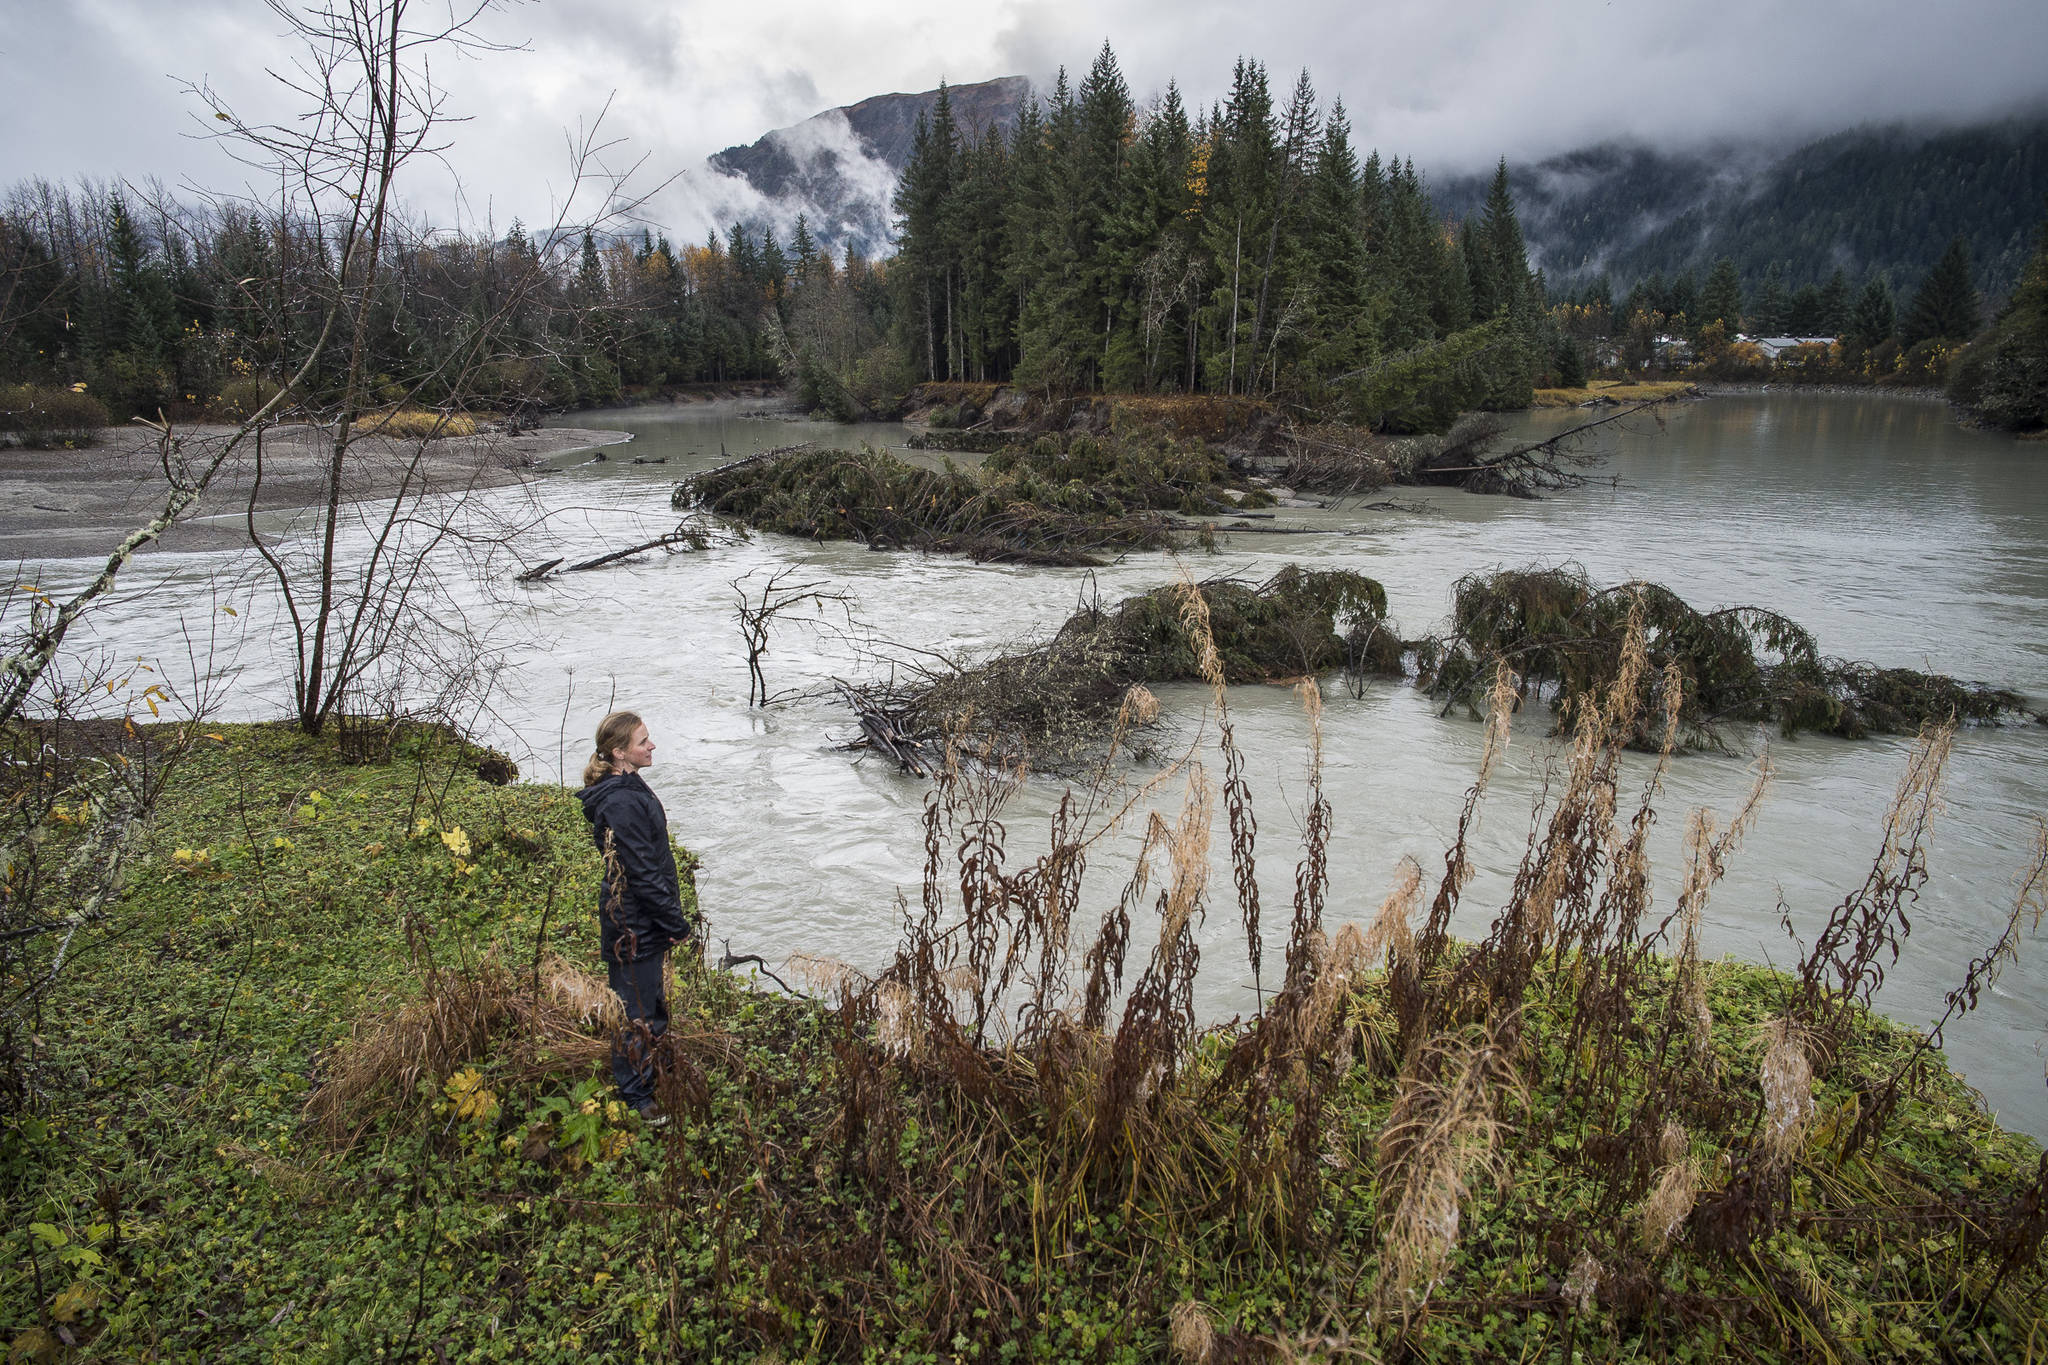 Sonia Nagorski, assistant professor of Geology Arts and Sciences at the University of Alaska Southeast, investigates the broken oxbow along the Mendenhall River in this October 2018 photo. (Michael Penn | Juneau Empire File)